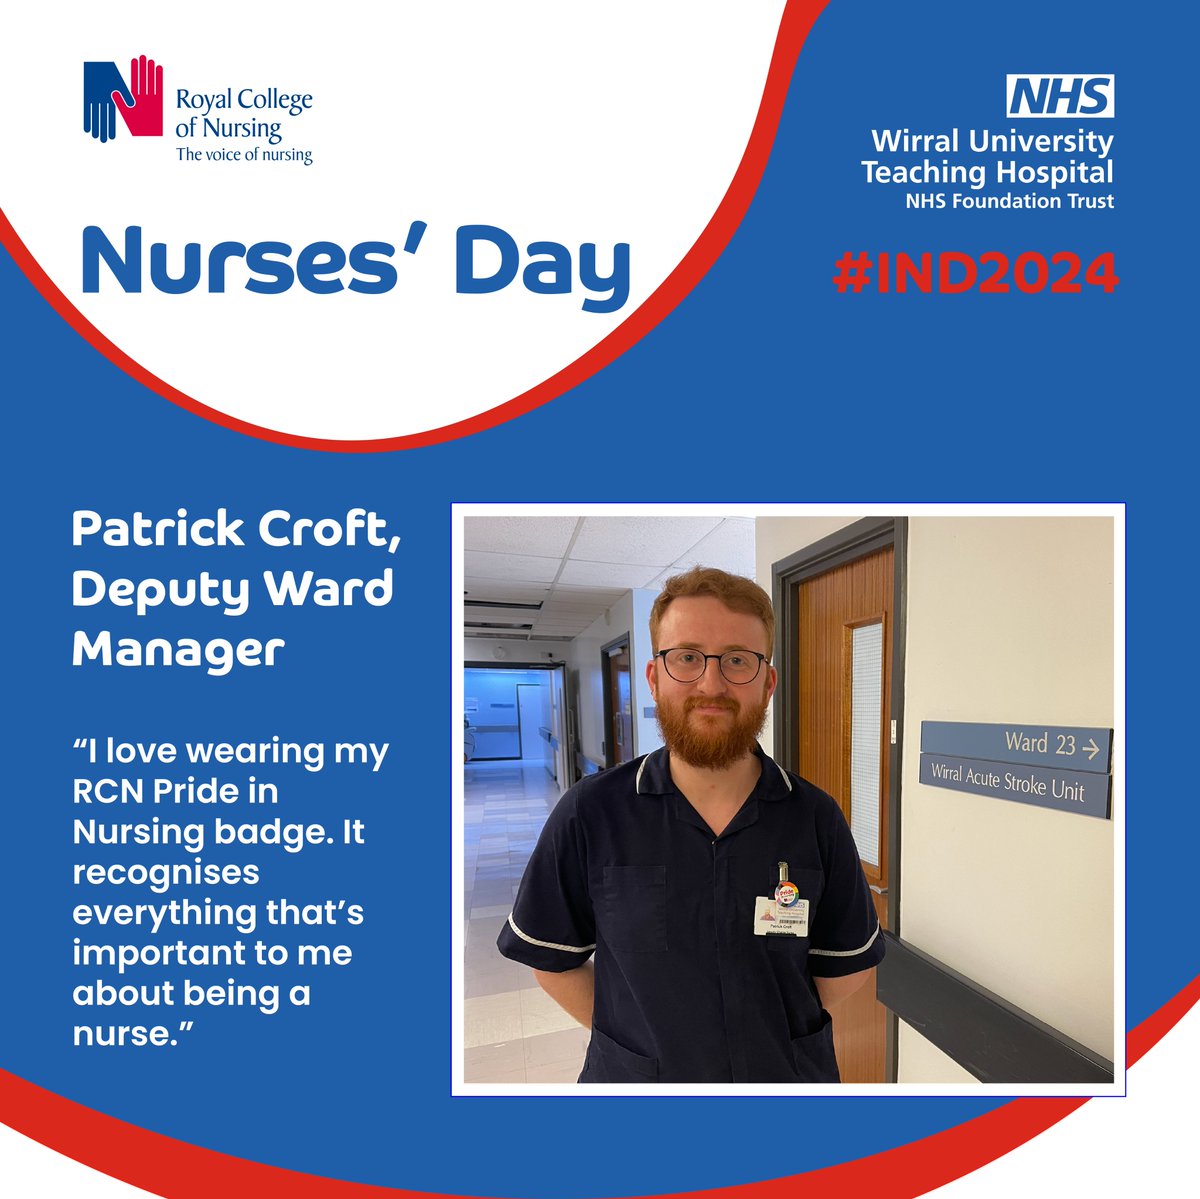 🙌 Join us in celebrating the resilience, compassion, and commitment of nurses worldwide. Let’s spread the message of pride in nursing! 👩‍⚕️👨‍⚕️ #NursesDay #PrideInNursing #HealthcareHeroes #IND2024 #OurNursesOurFuture @WHHNHS